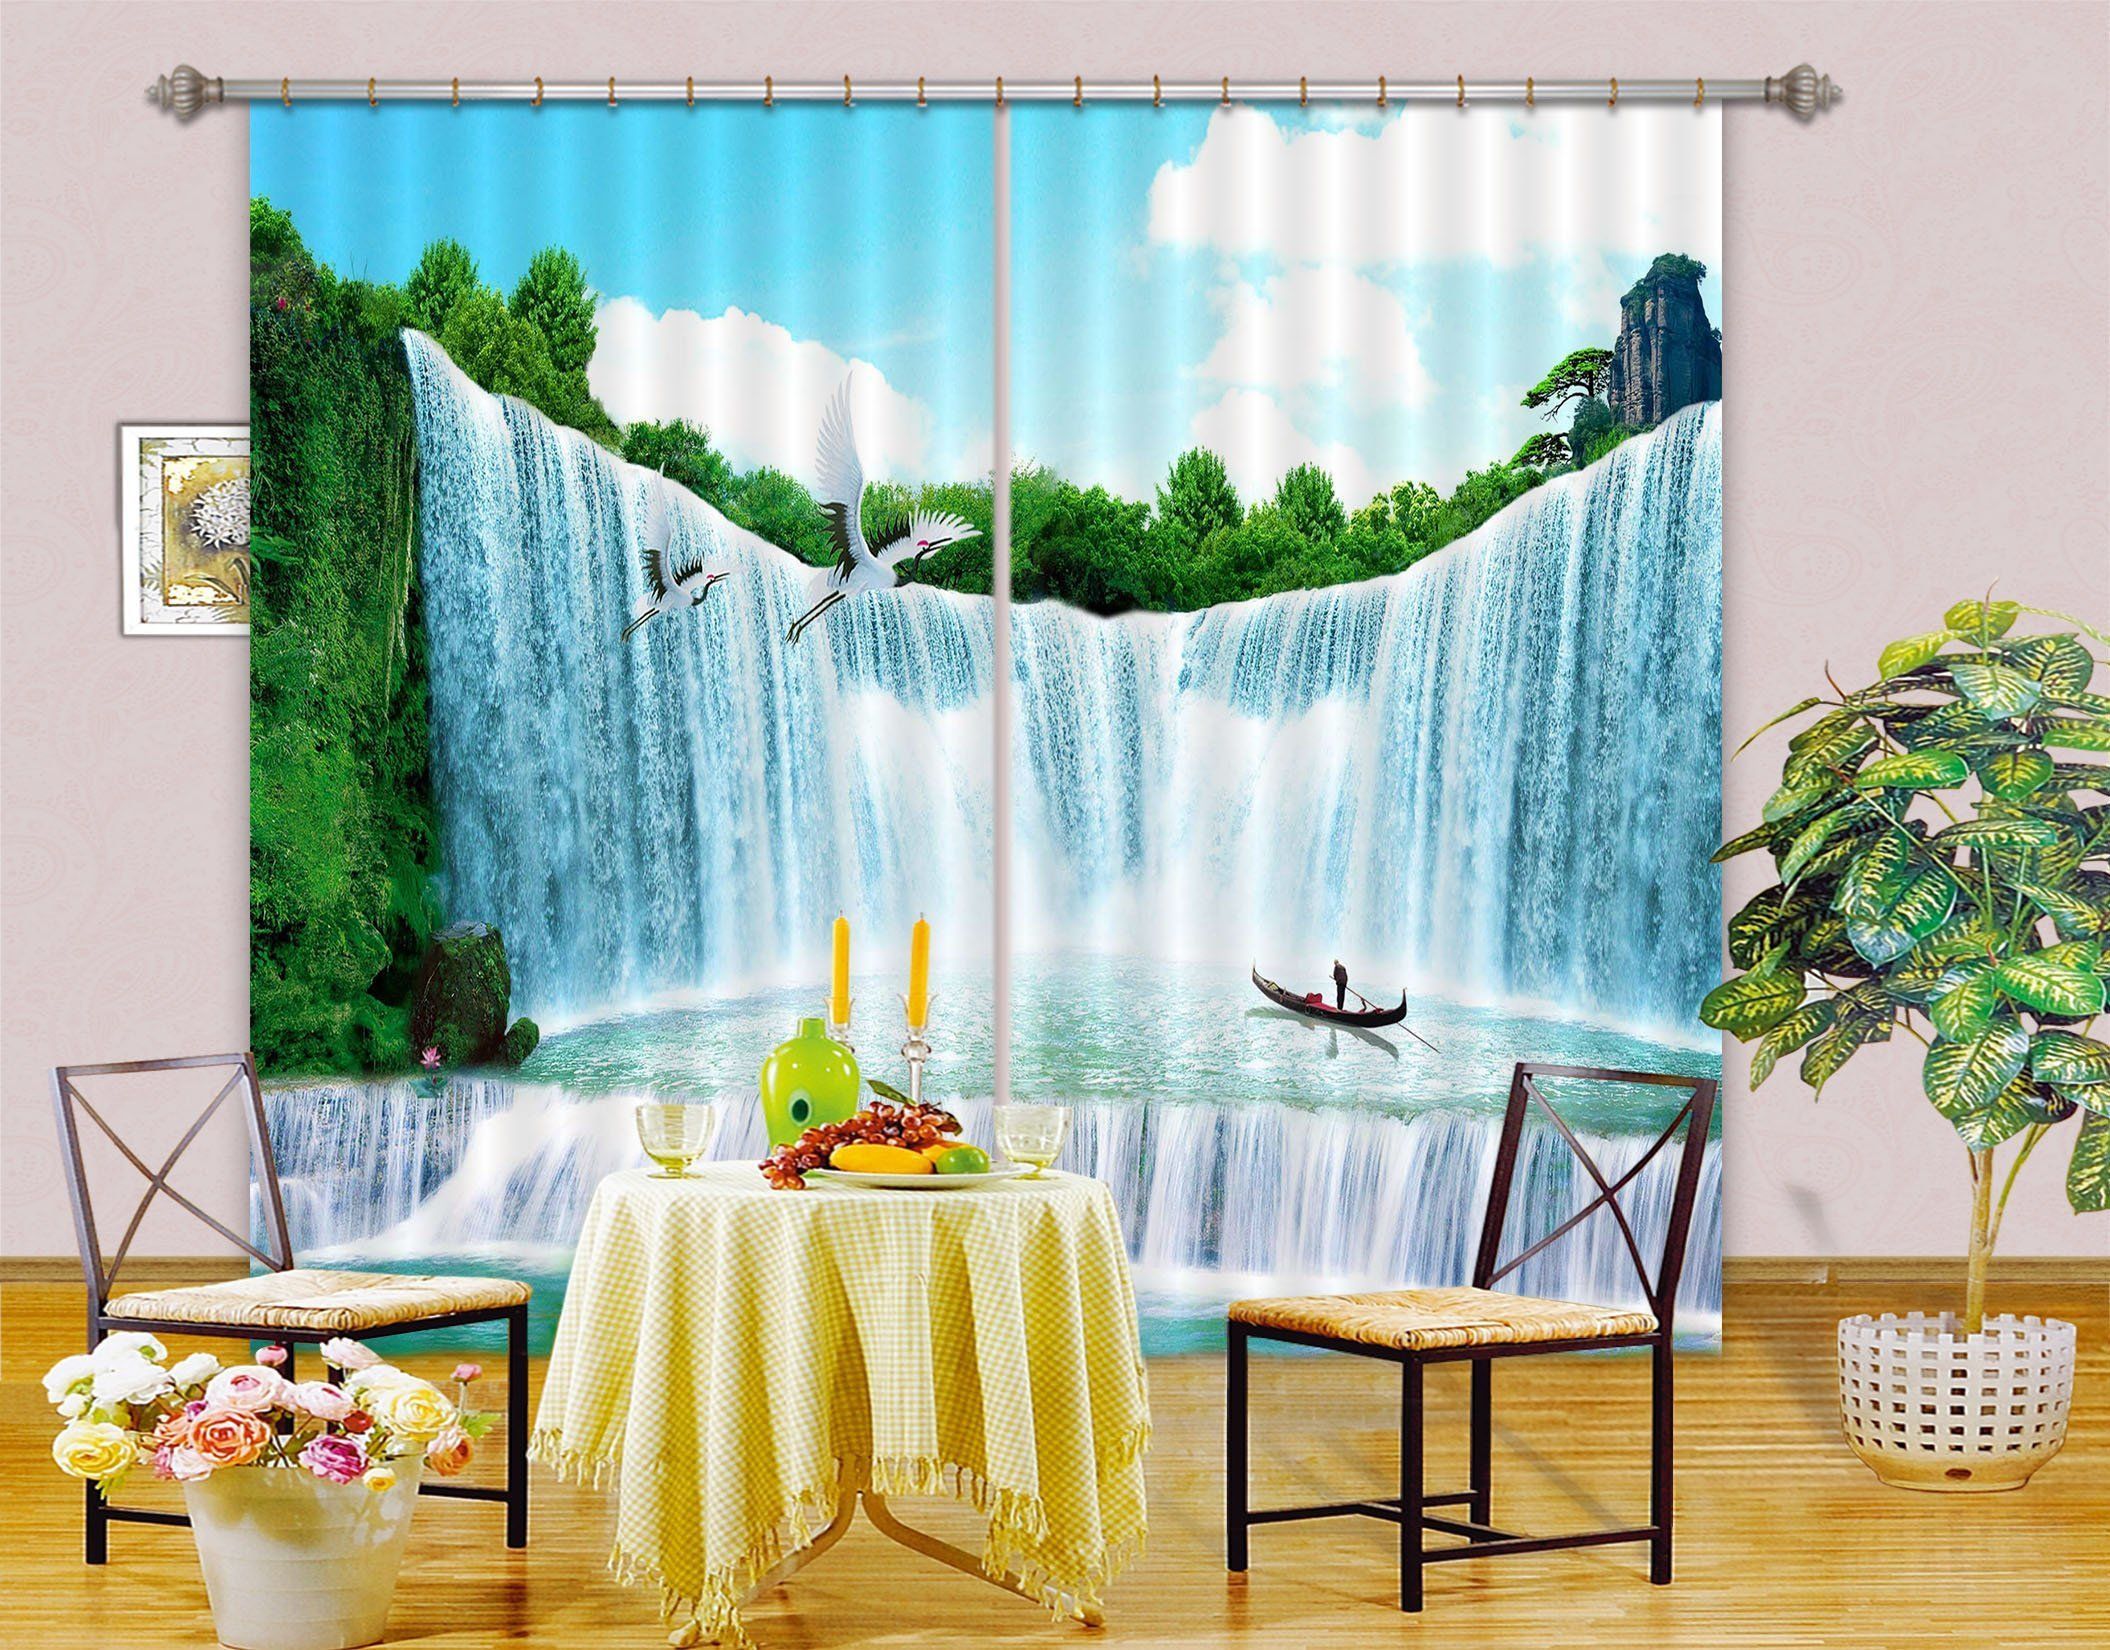 3D Waterfall With Plants Single Boat Printed Window Curtain